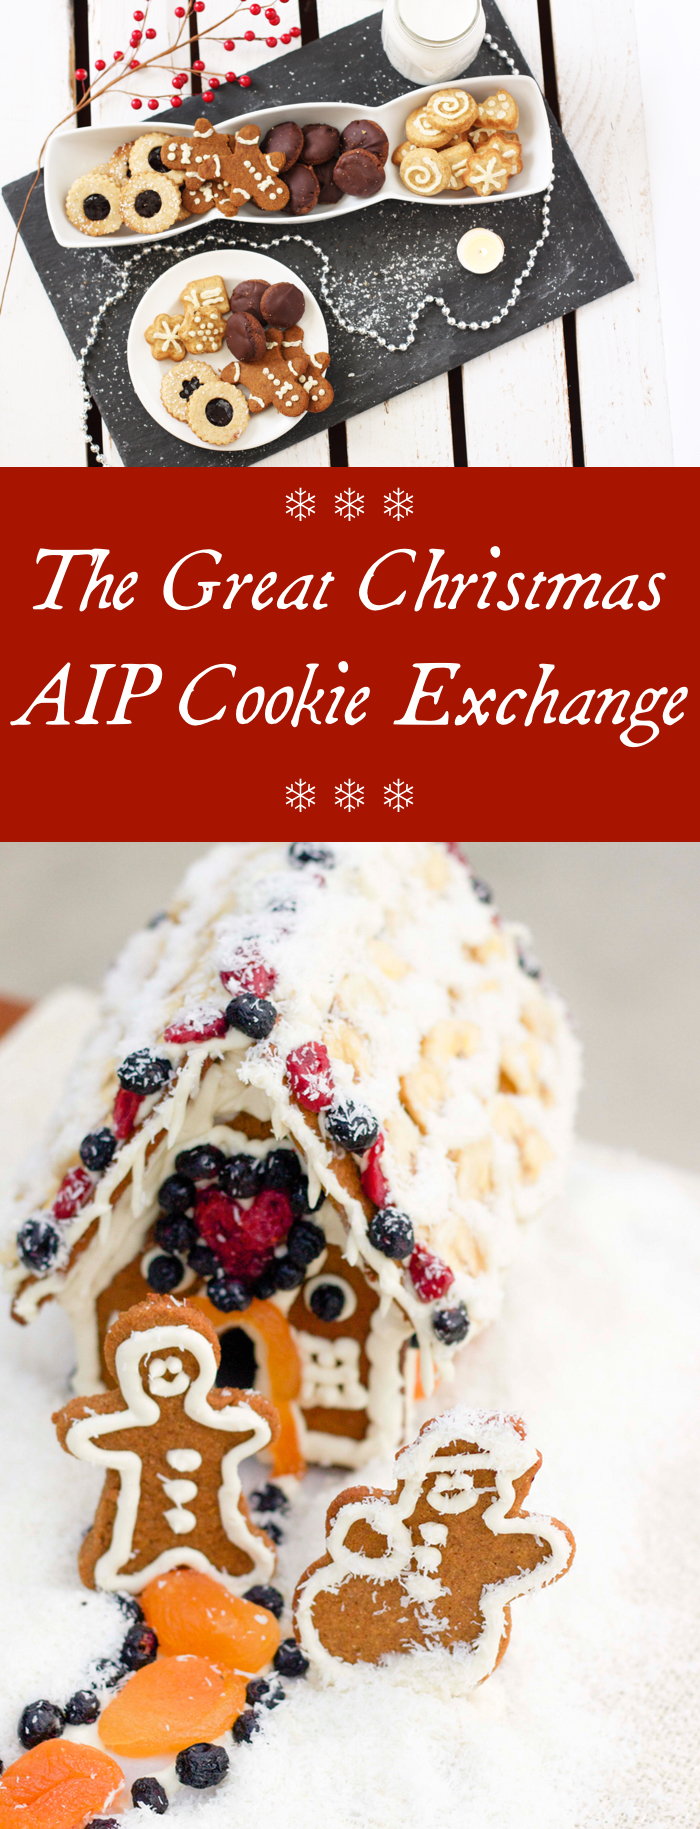 The Great Christmas AIP Cookie Exchange!